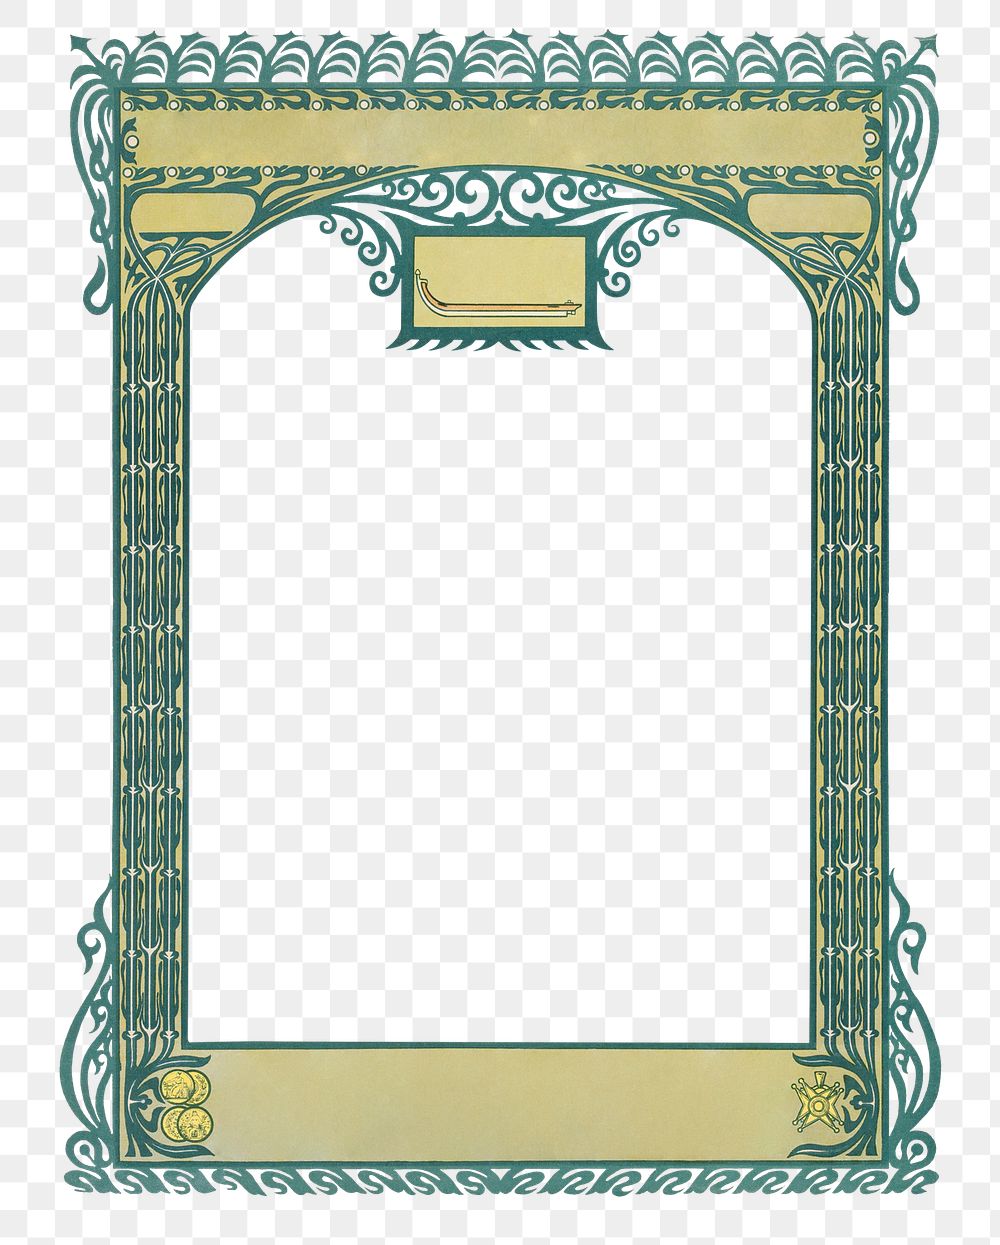 Frame png with vintage green border, remixed from the artworks by Johann Georg van Caspel